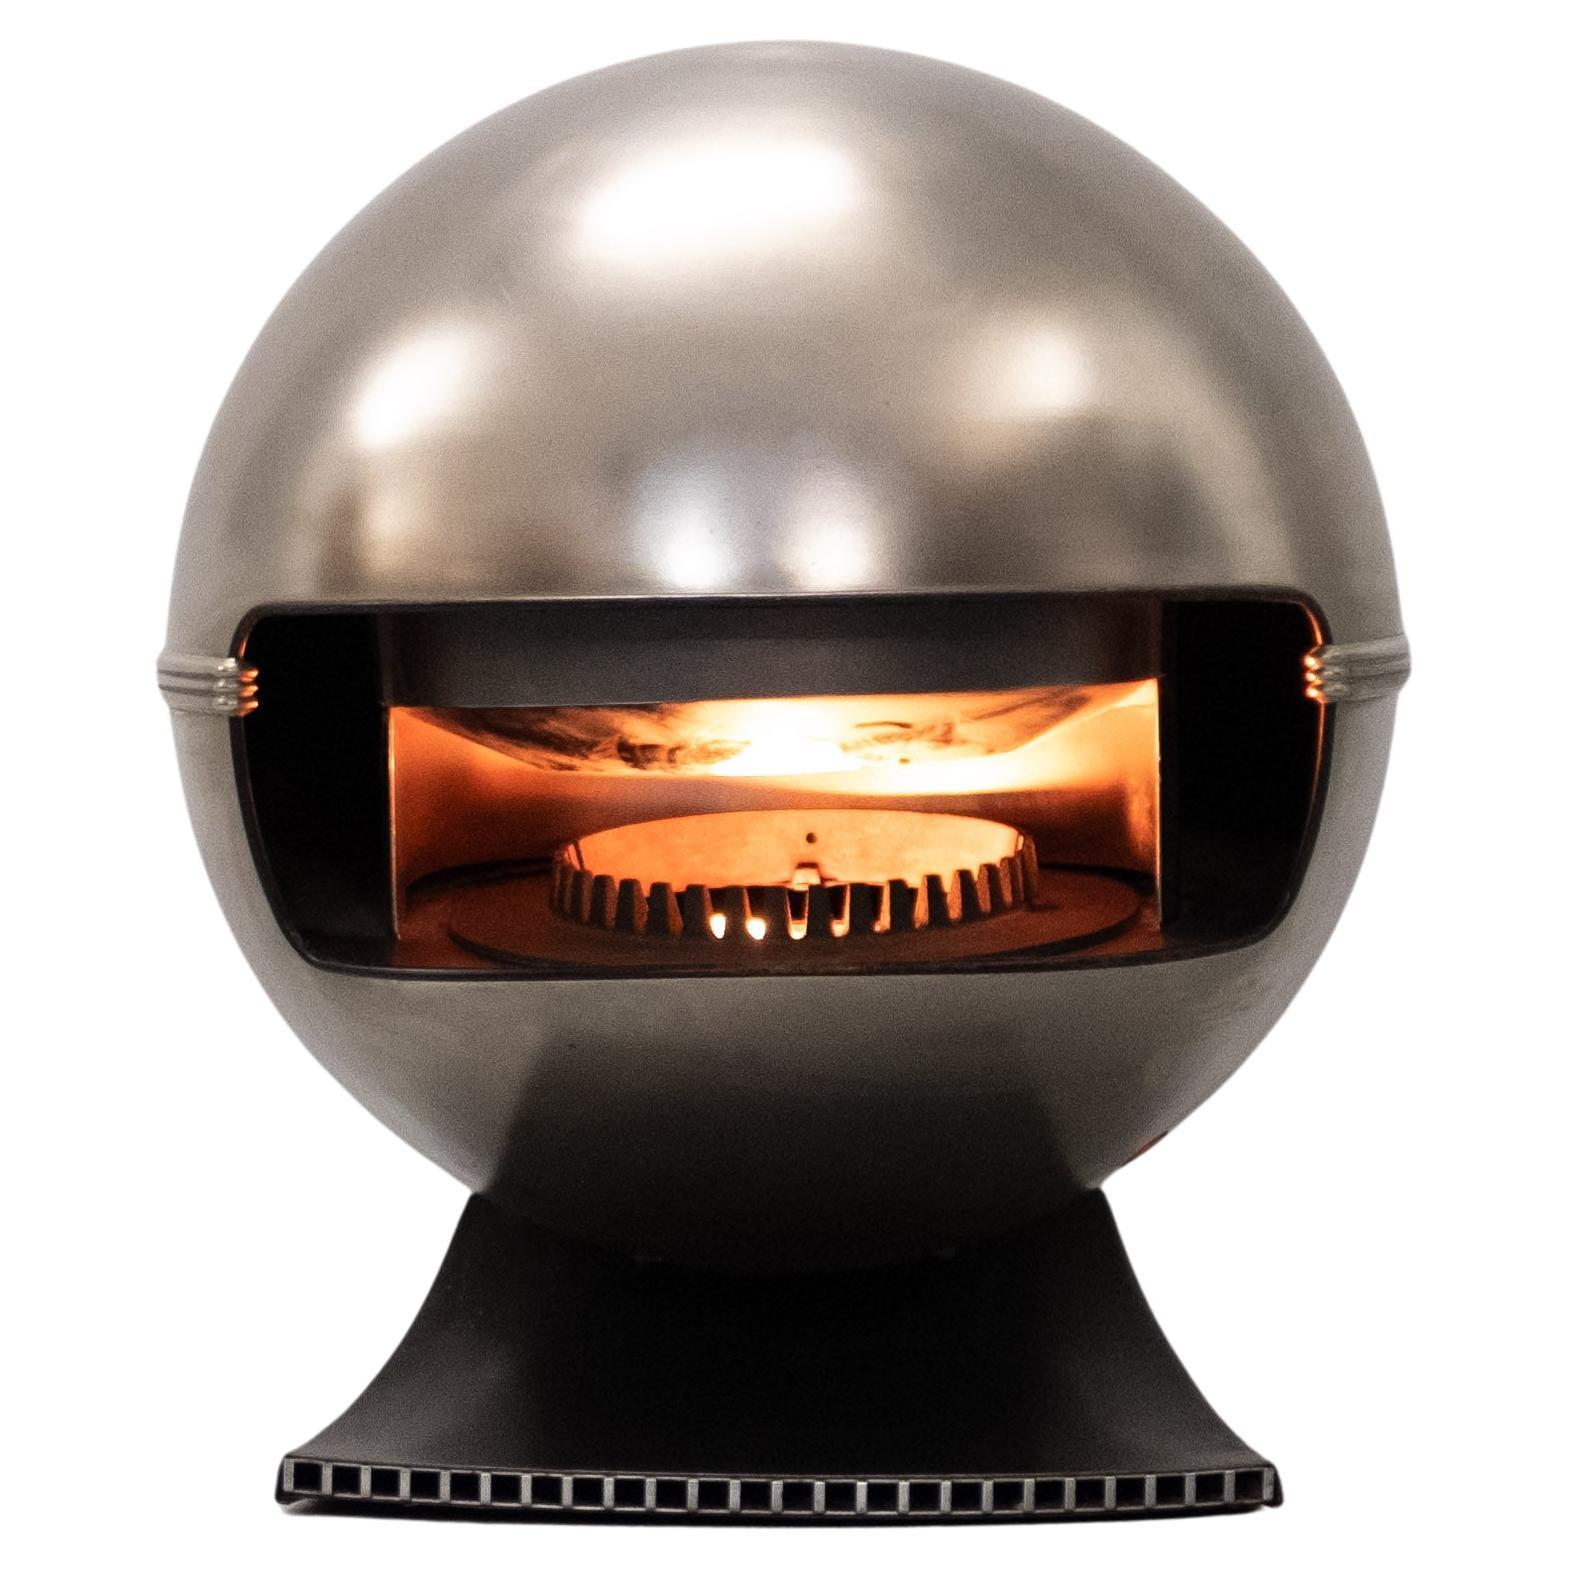 Space Age Richard Wolthekker for Faber - Space Ace  Gas fireplace  1960s  For Sale